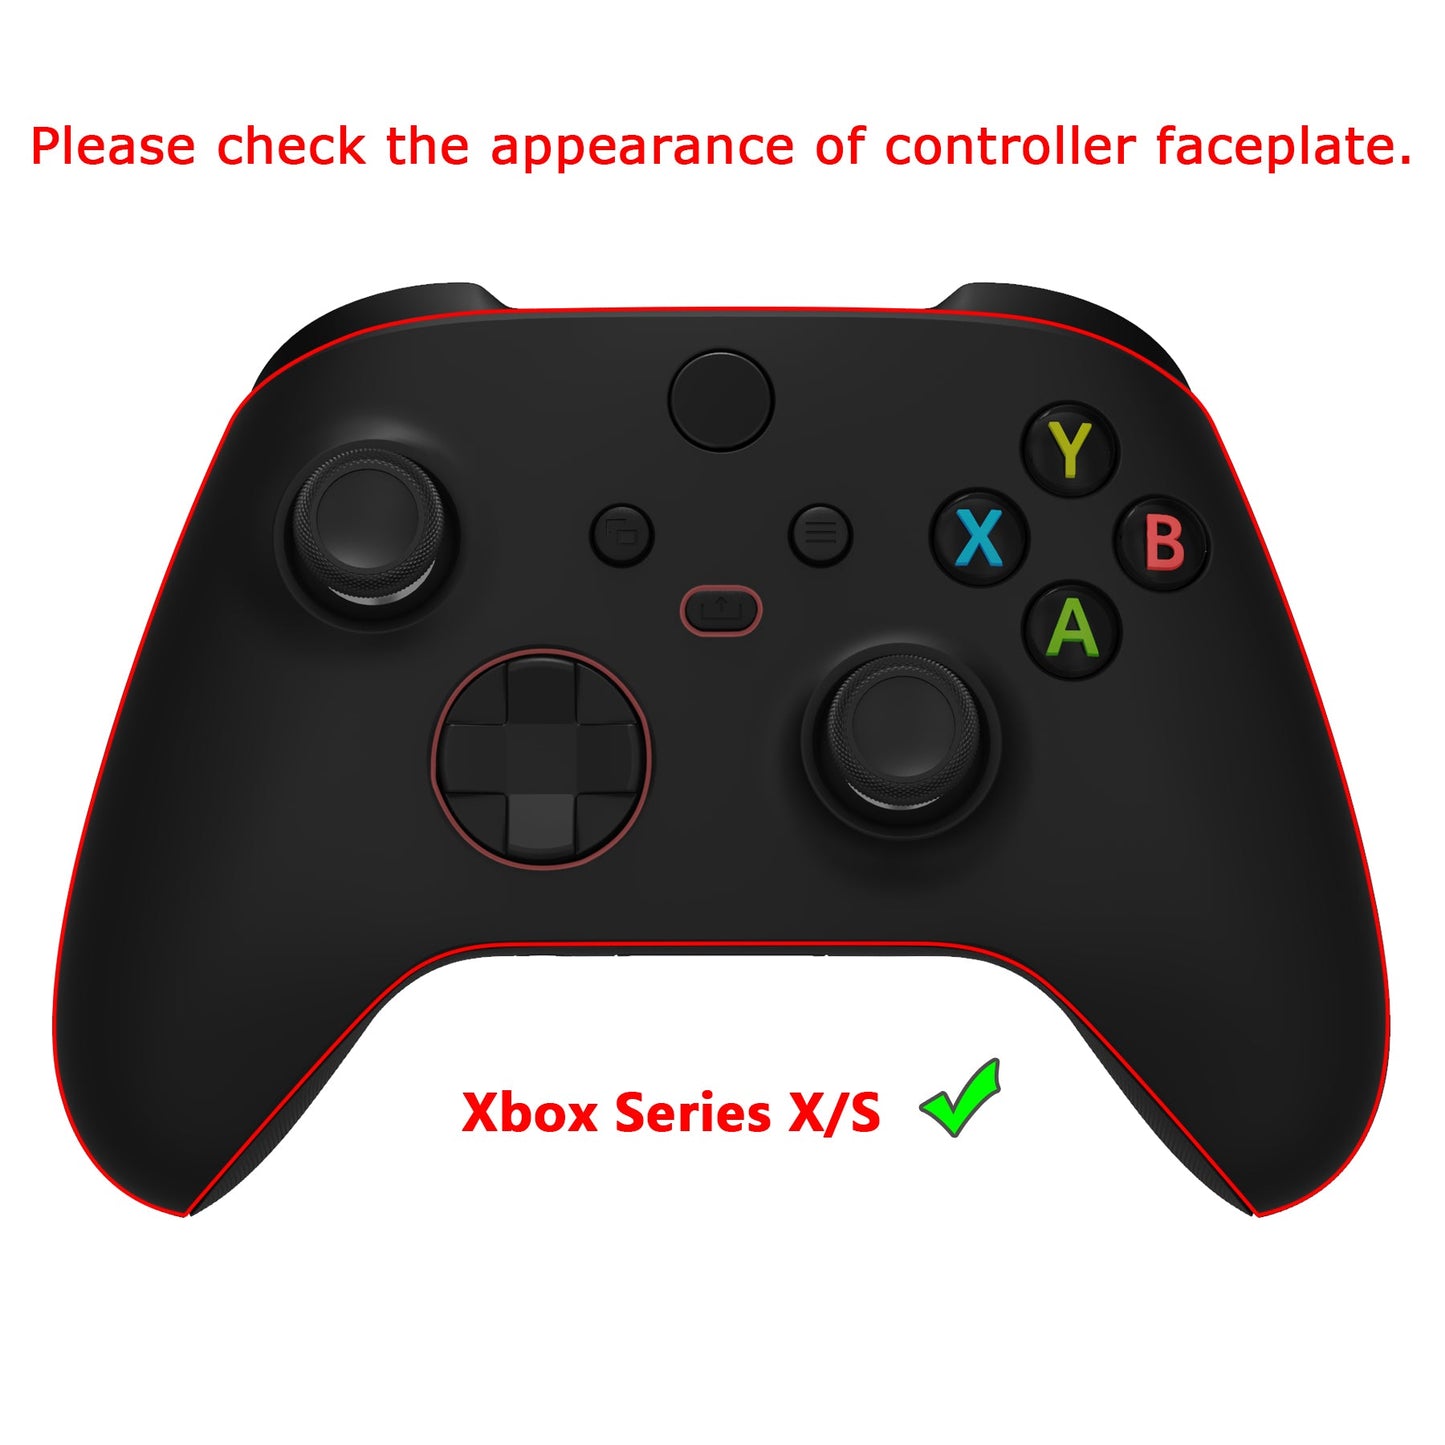 PlayVital Black Anti-Skid Sweat-Absorbent Controller Grip for Xbox Series X/S Controller, Professional Textured Soft Rubber Pads Handle Grips for Xbox Series X/S Controller - X3PJ001 PlayVital